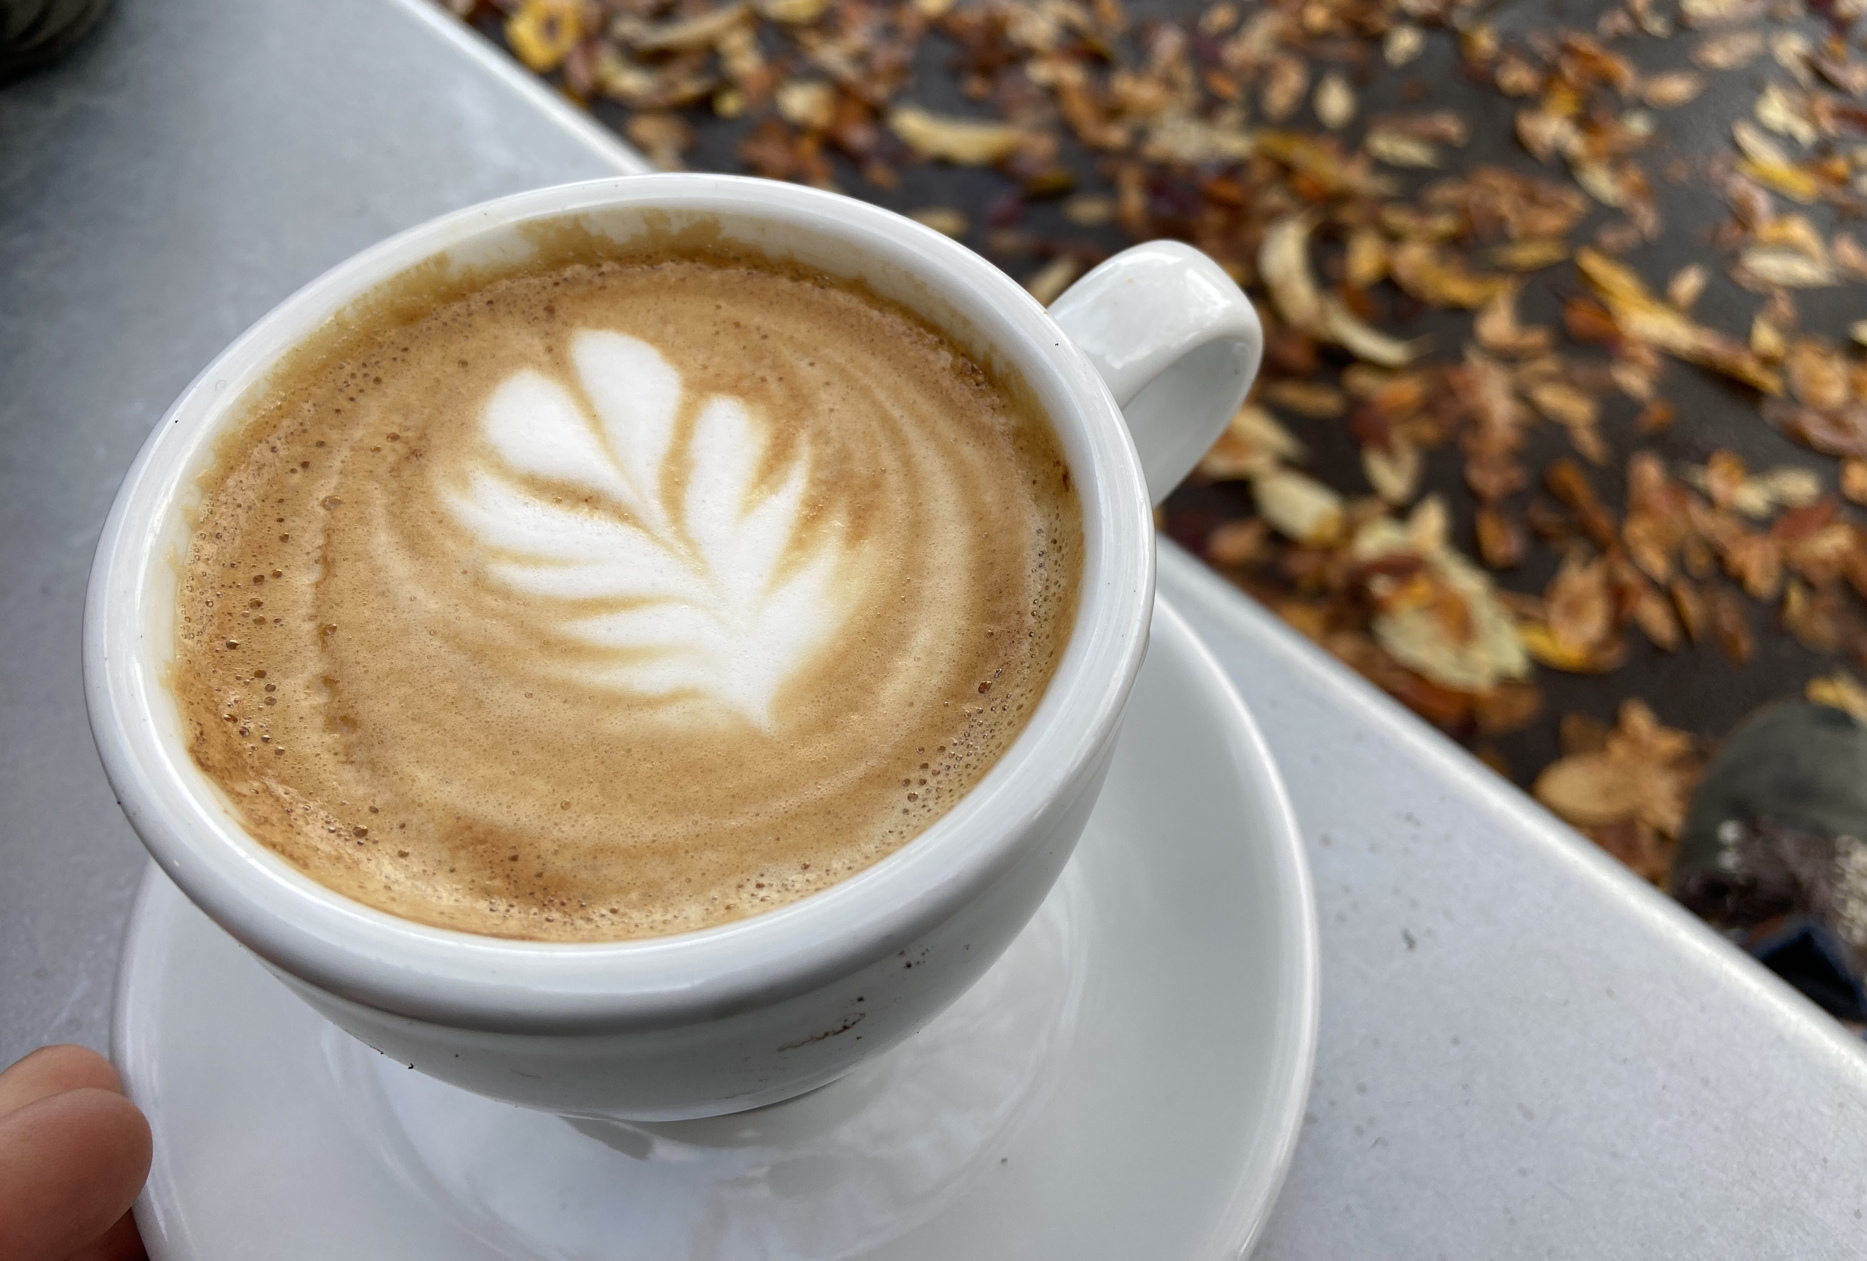 beautifully made cappuccino with simple latte art on a white cup and saucer on a silver table over sidewalk with wet gold and rust and brown leaves